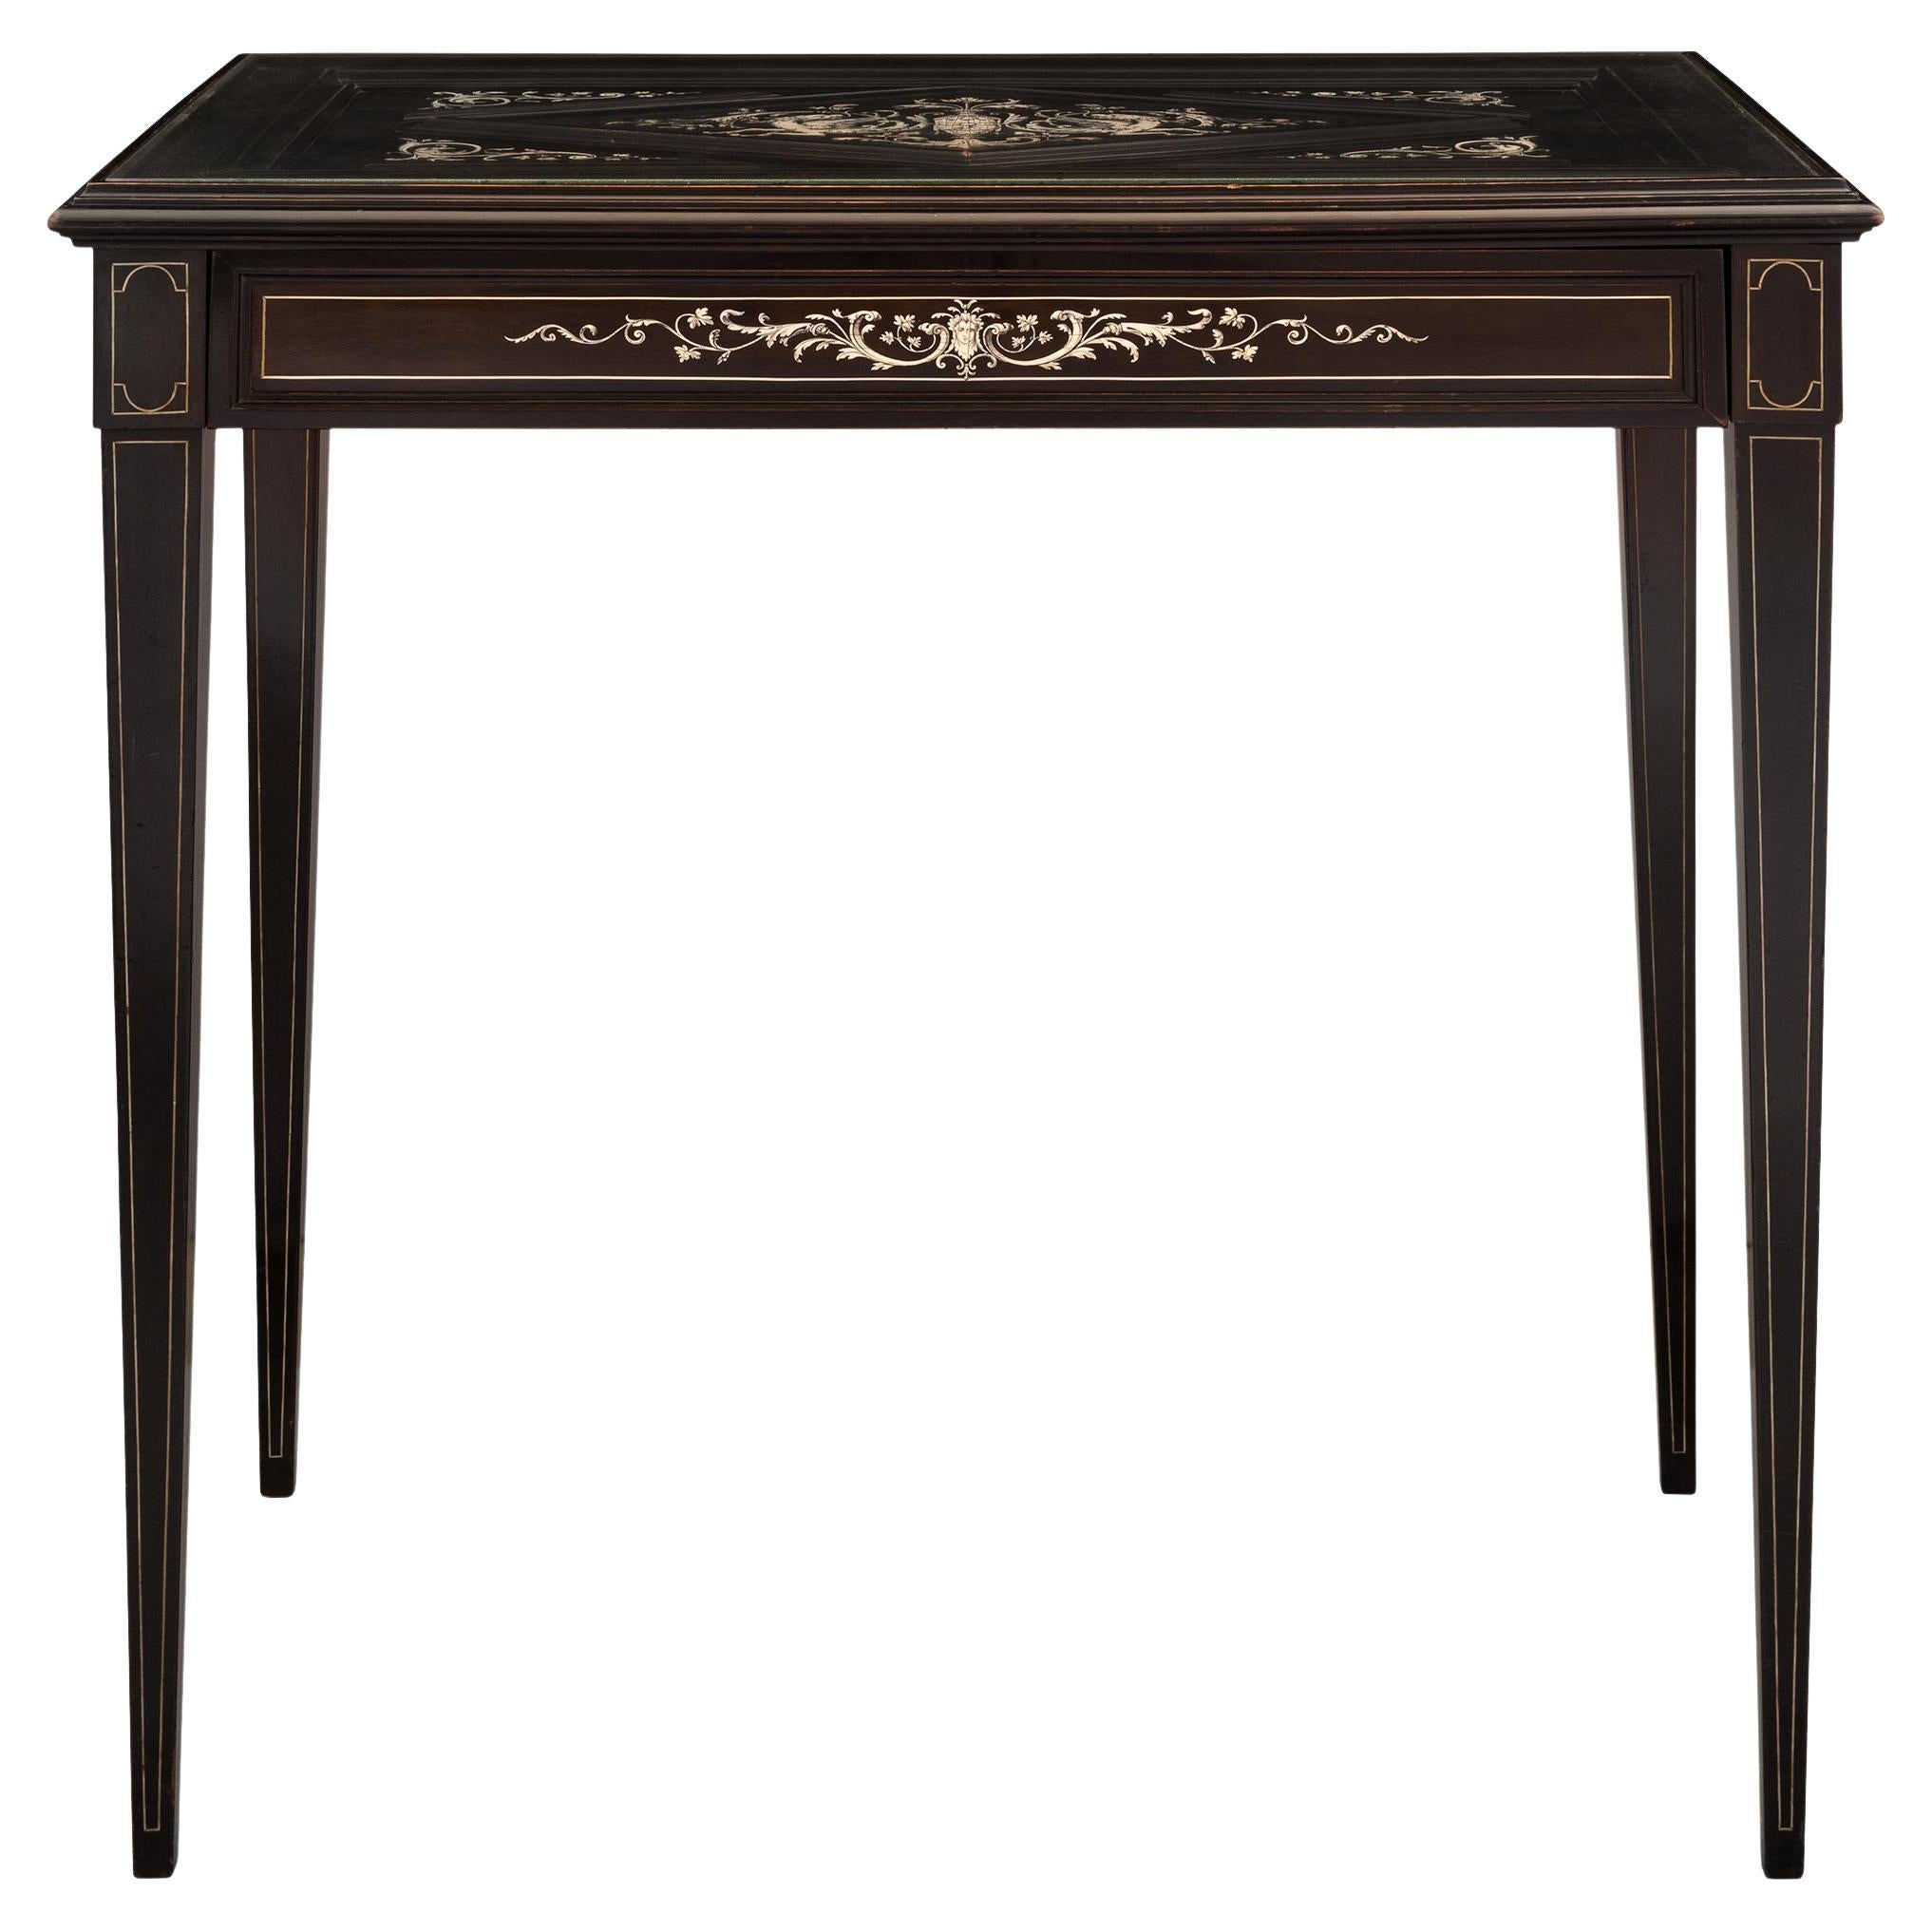 Italian Mid-19th Century Ebony and Bone Side Table with One Drawer